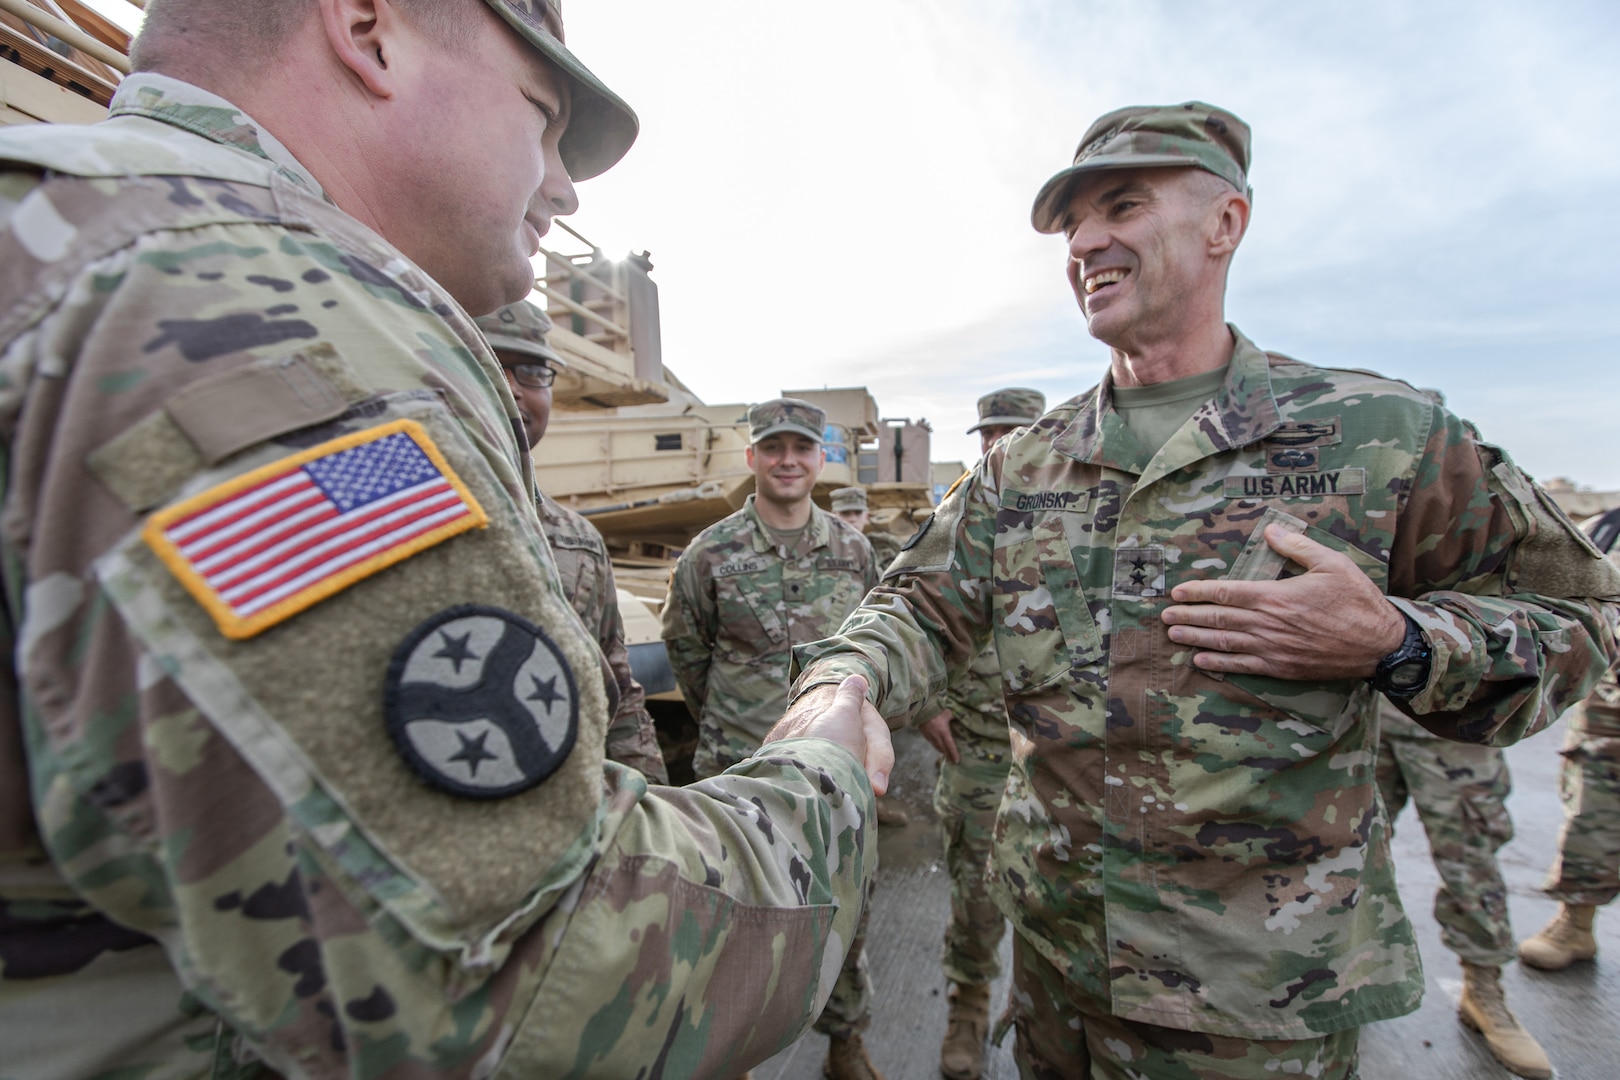 U.S. Army Maj. Gen. John Gronski, U.S. Army Europe’s deputy commanding general, meets with Soldiers assigned to Battle Group Poland during a visit to Bemowo Piskie Training Area, Poland, Oct. 30, 2018.